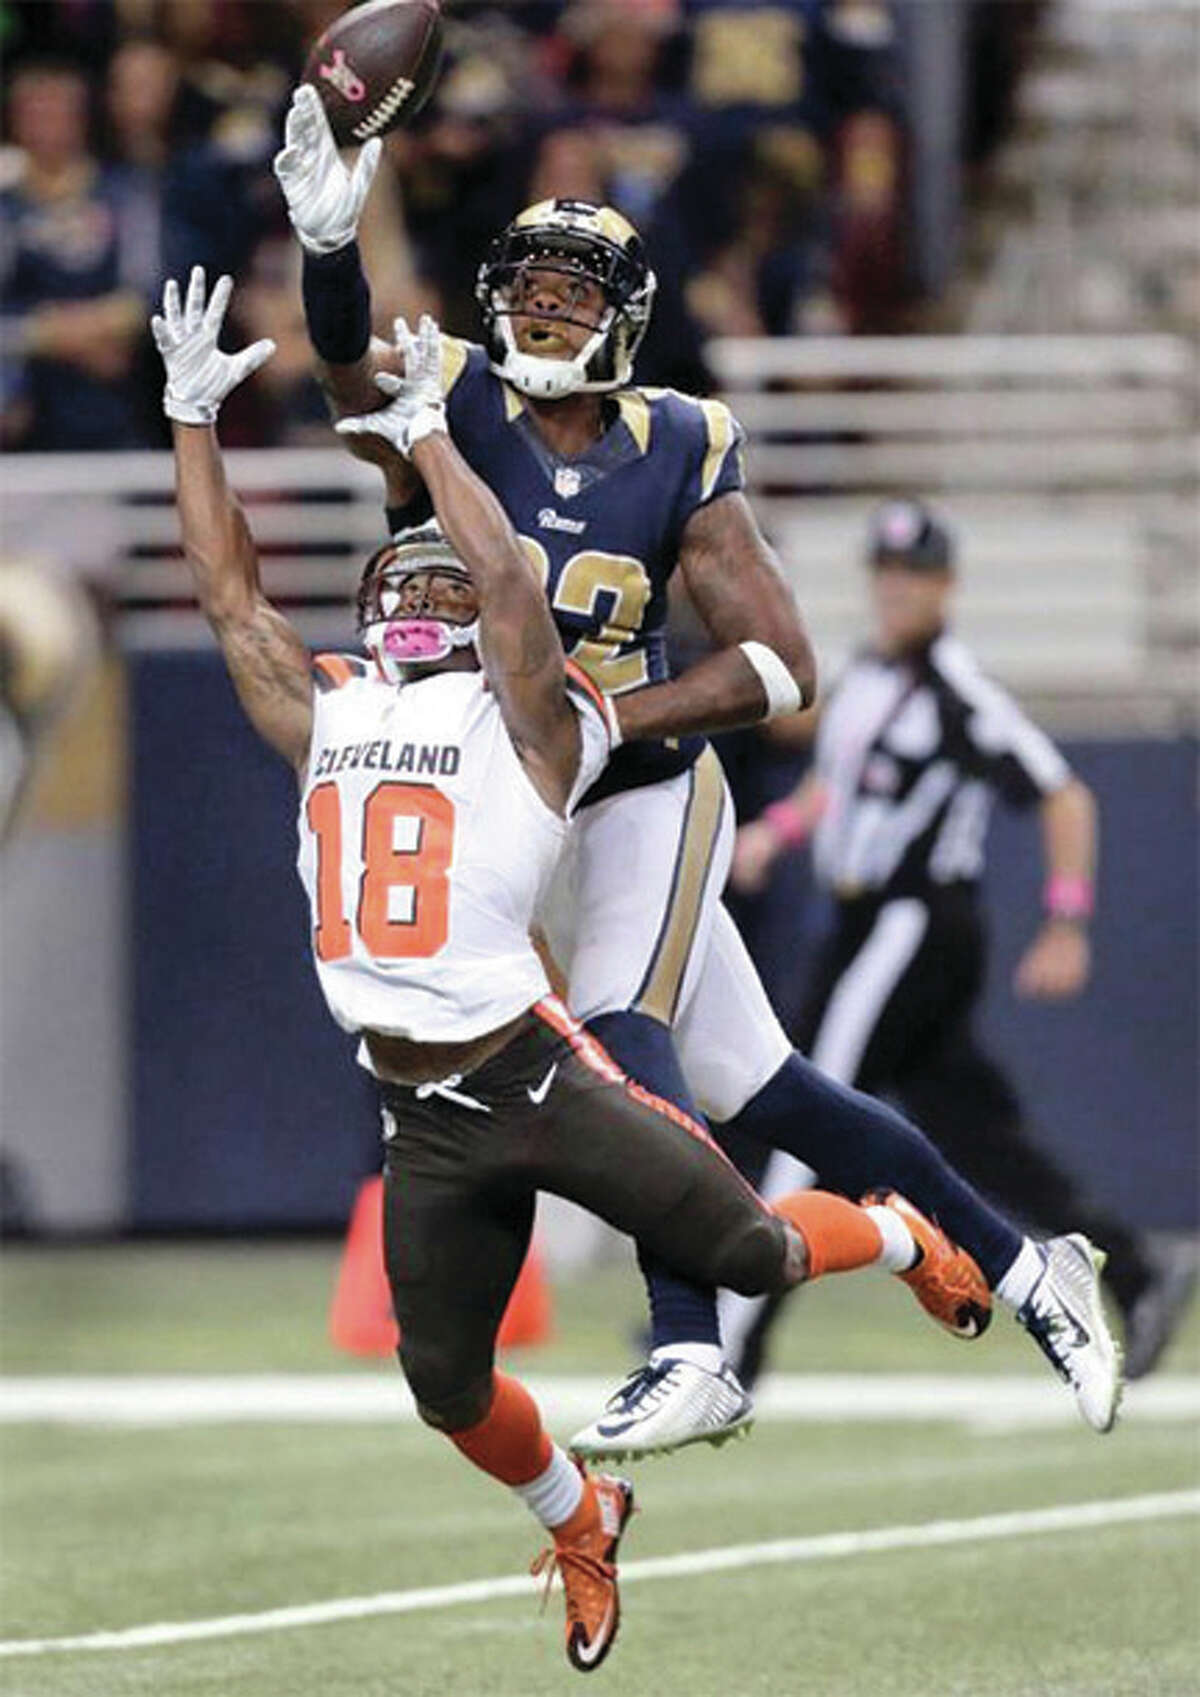 Rams cornerback Trumaine Johnson goes up to break up a pass intended for Brown wide receiver Taylor Gabriel (18) on Sunday in St. Louis.